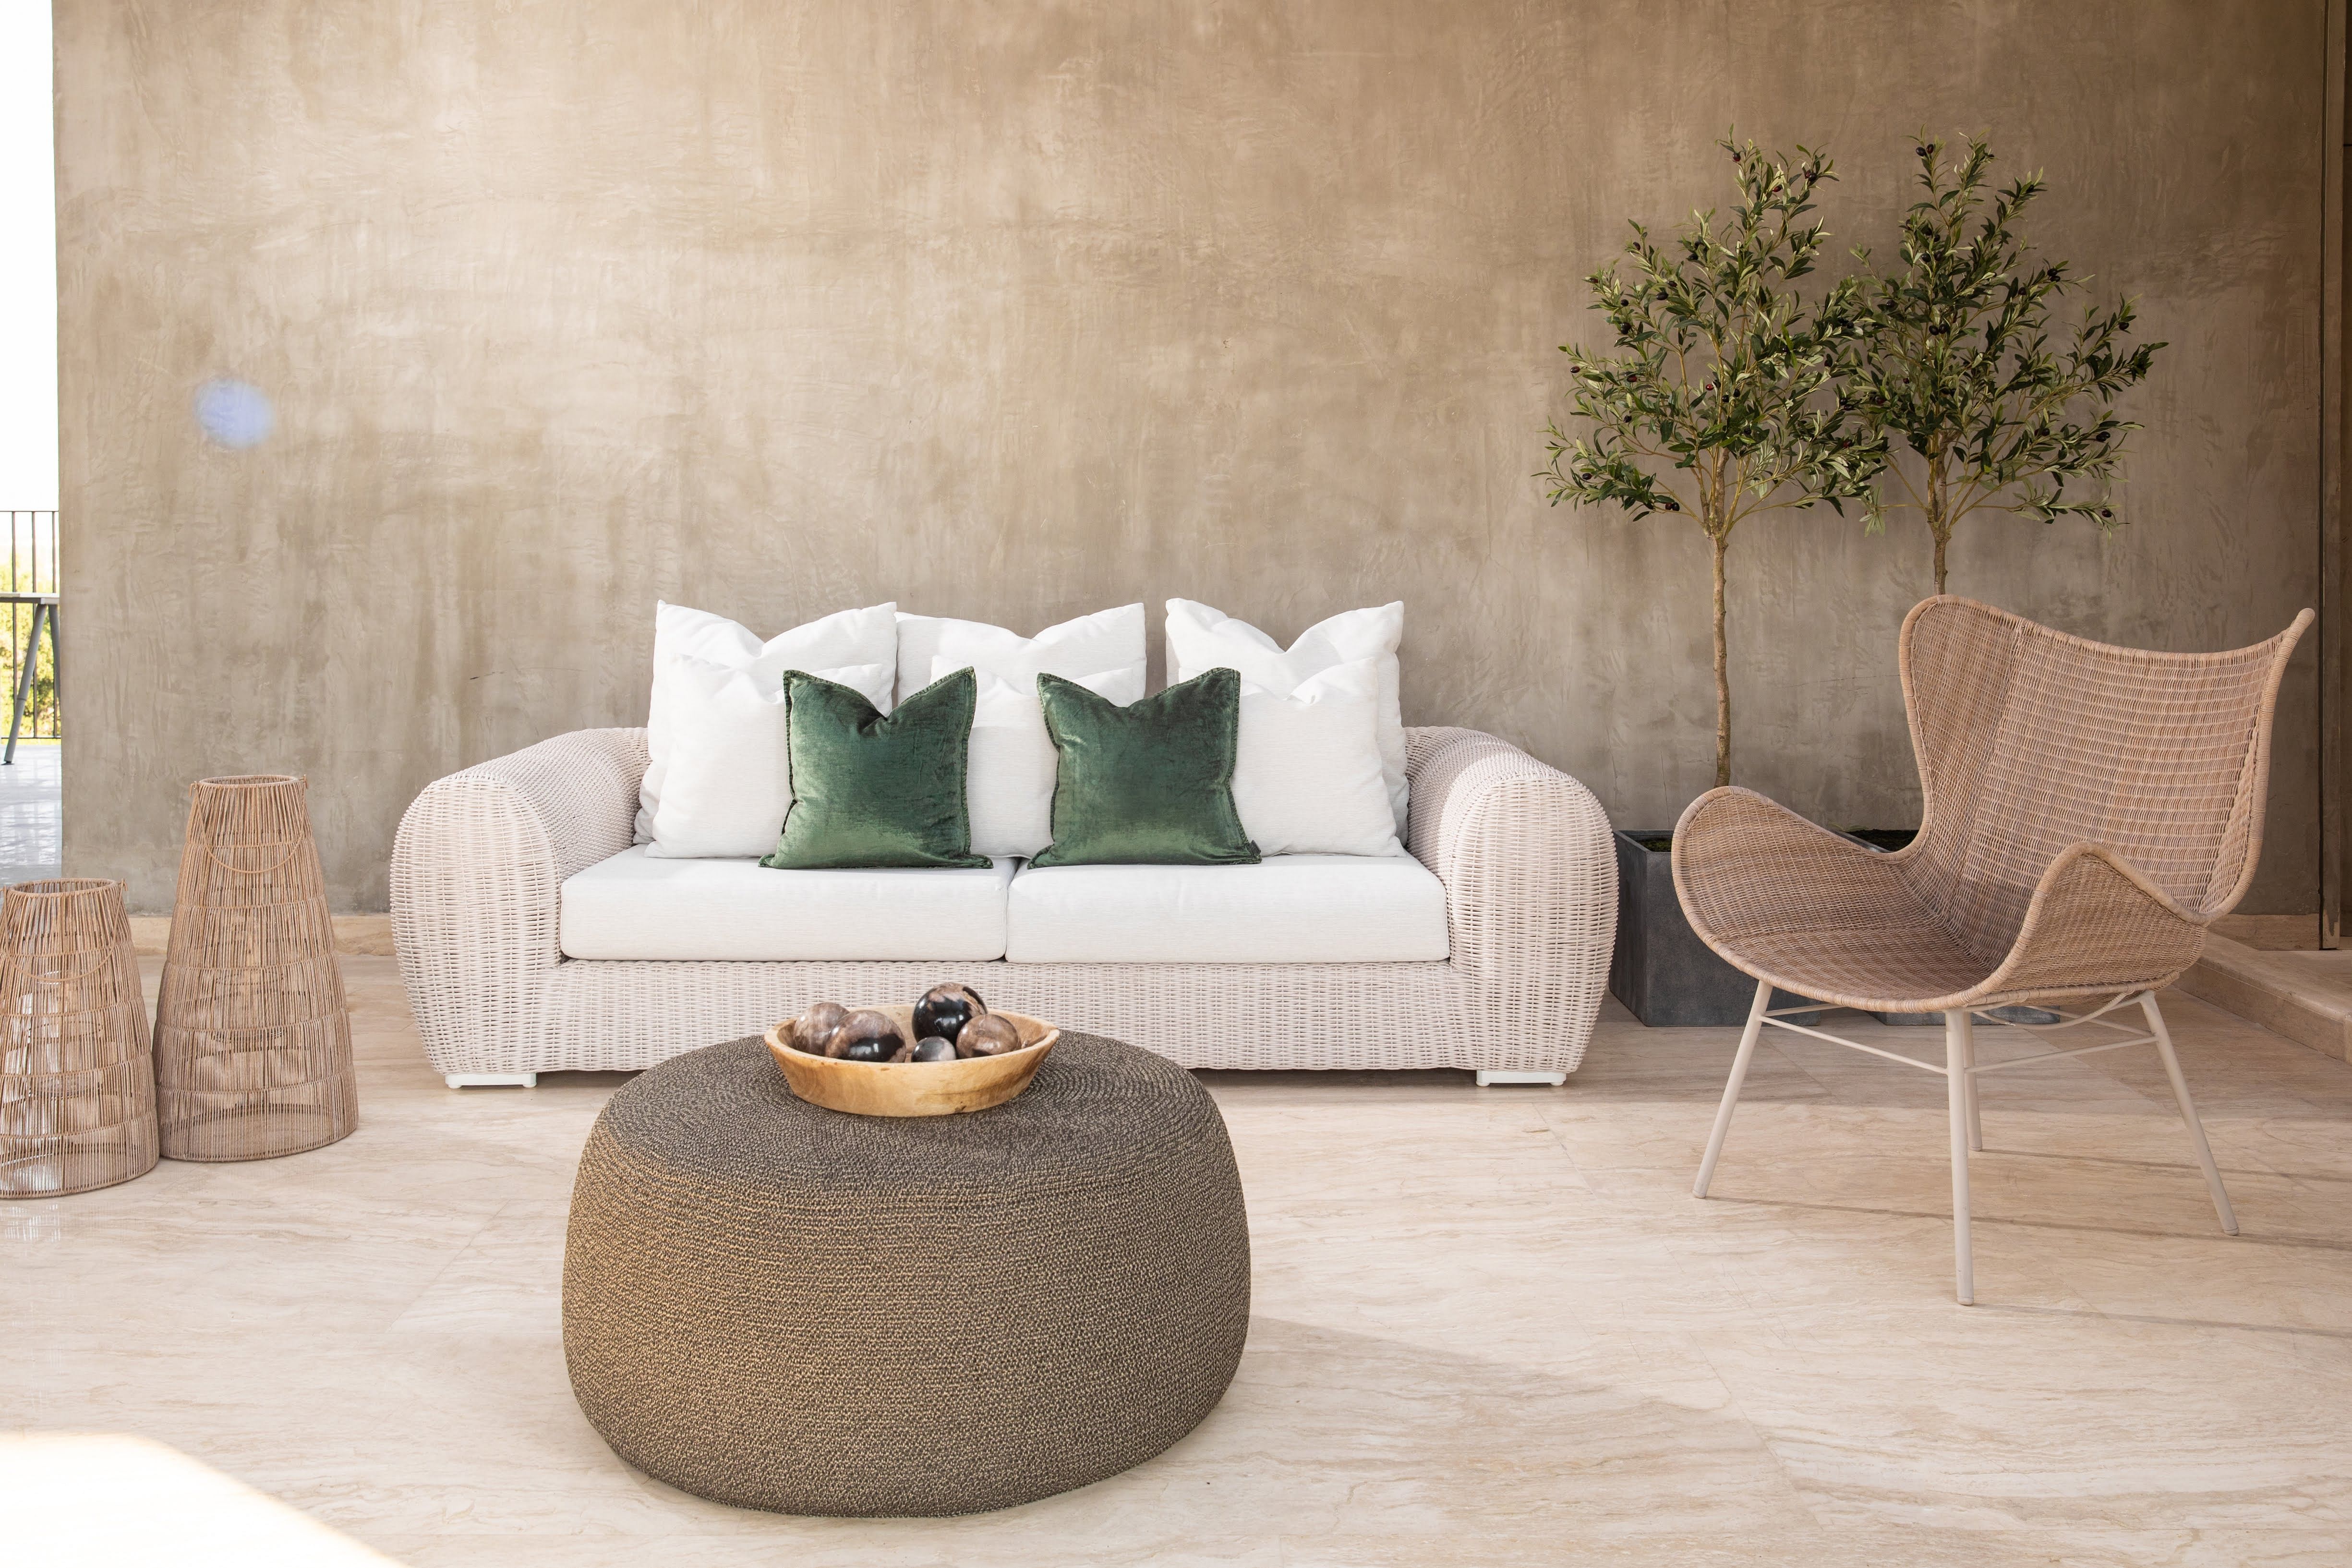 A white two-seater sofa stands against a taupe wall. A rattan armchair, coffee table, accessories and miniature olive trees stand nearby.